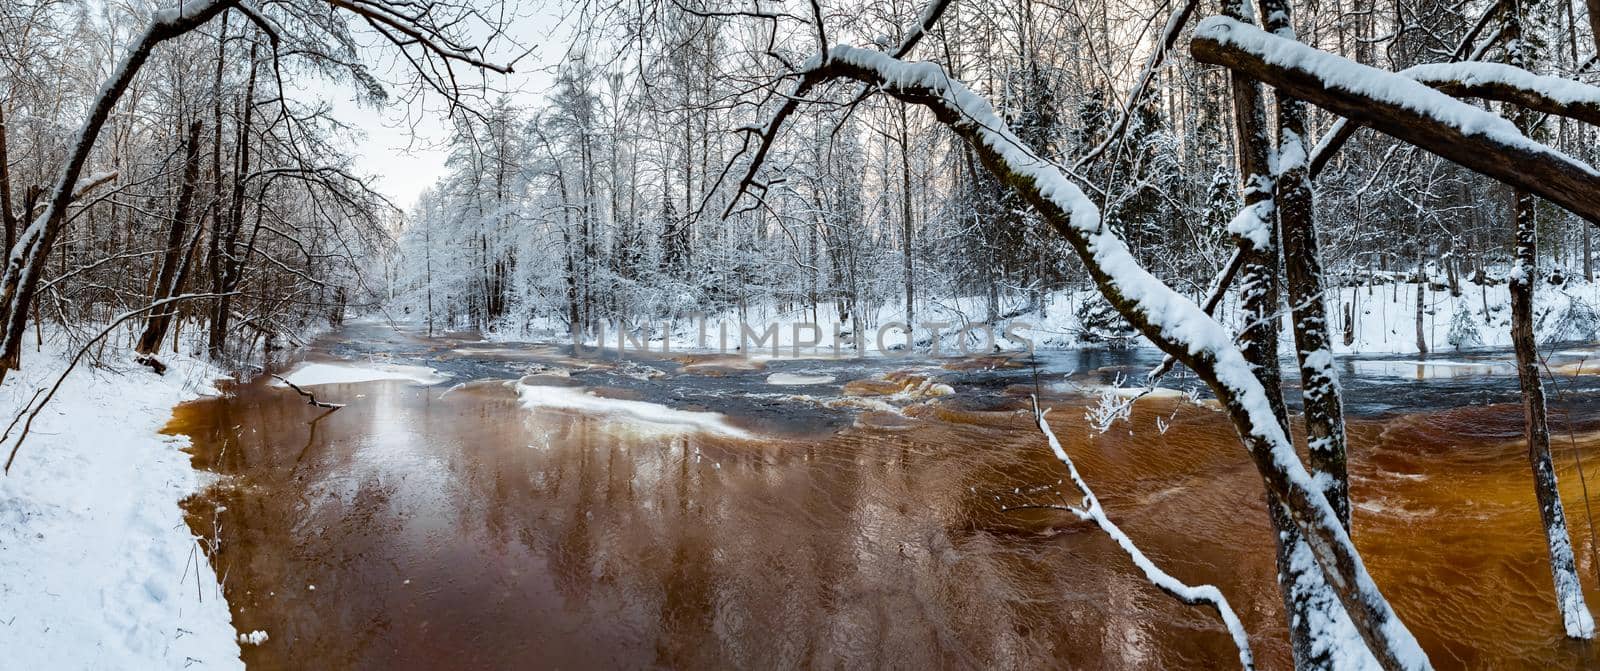 The wild nature at sunset, the wild frozen small river in the winter wood, the Red River, ice, snow-covered trees. High quality photo